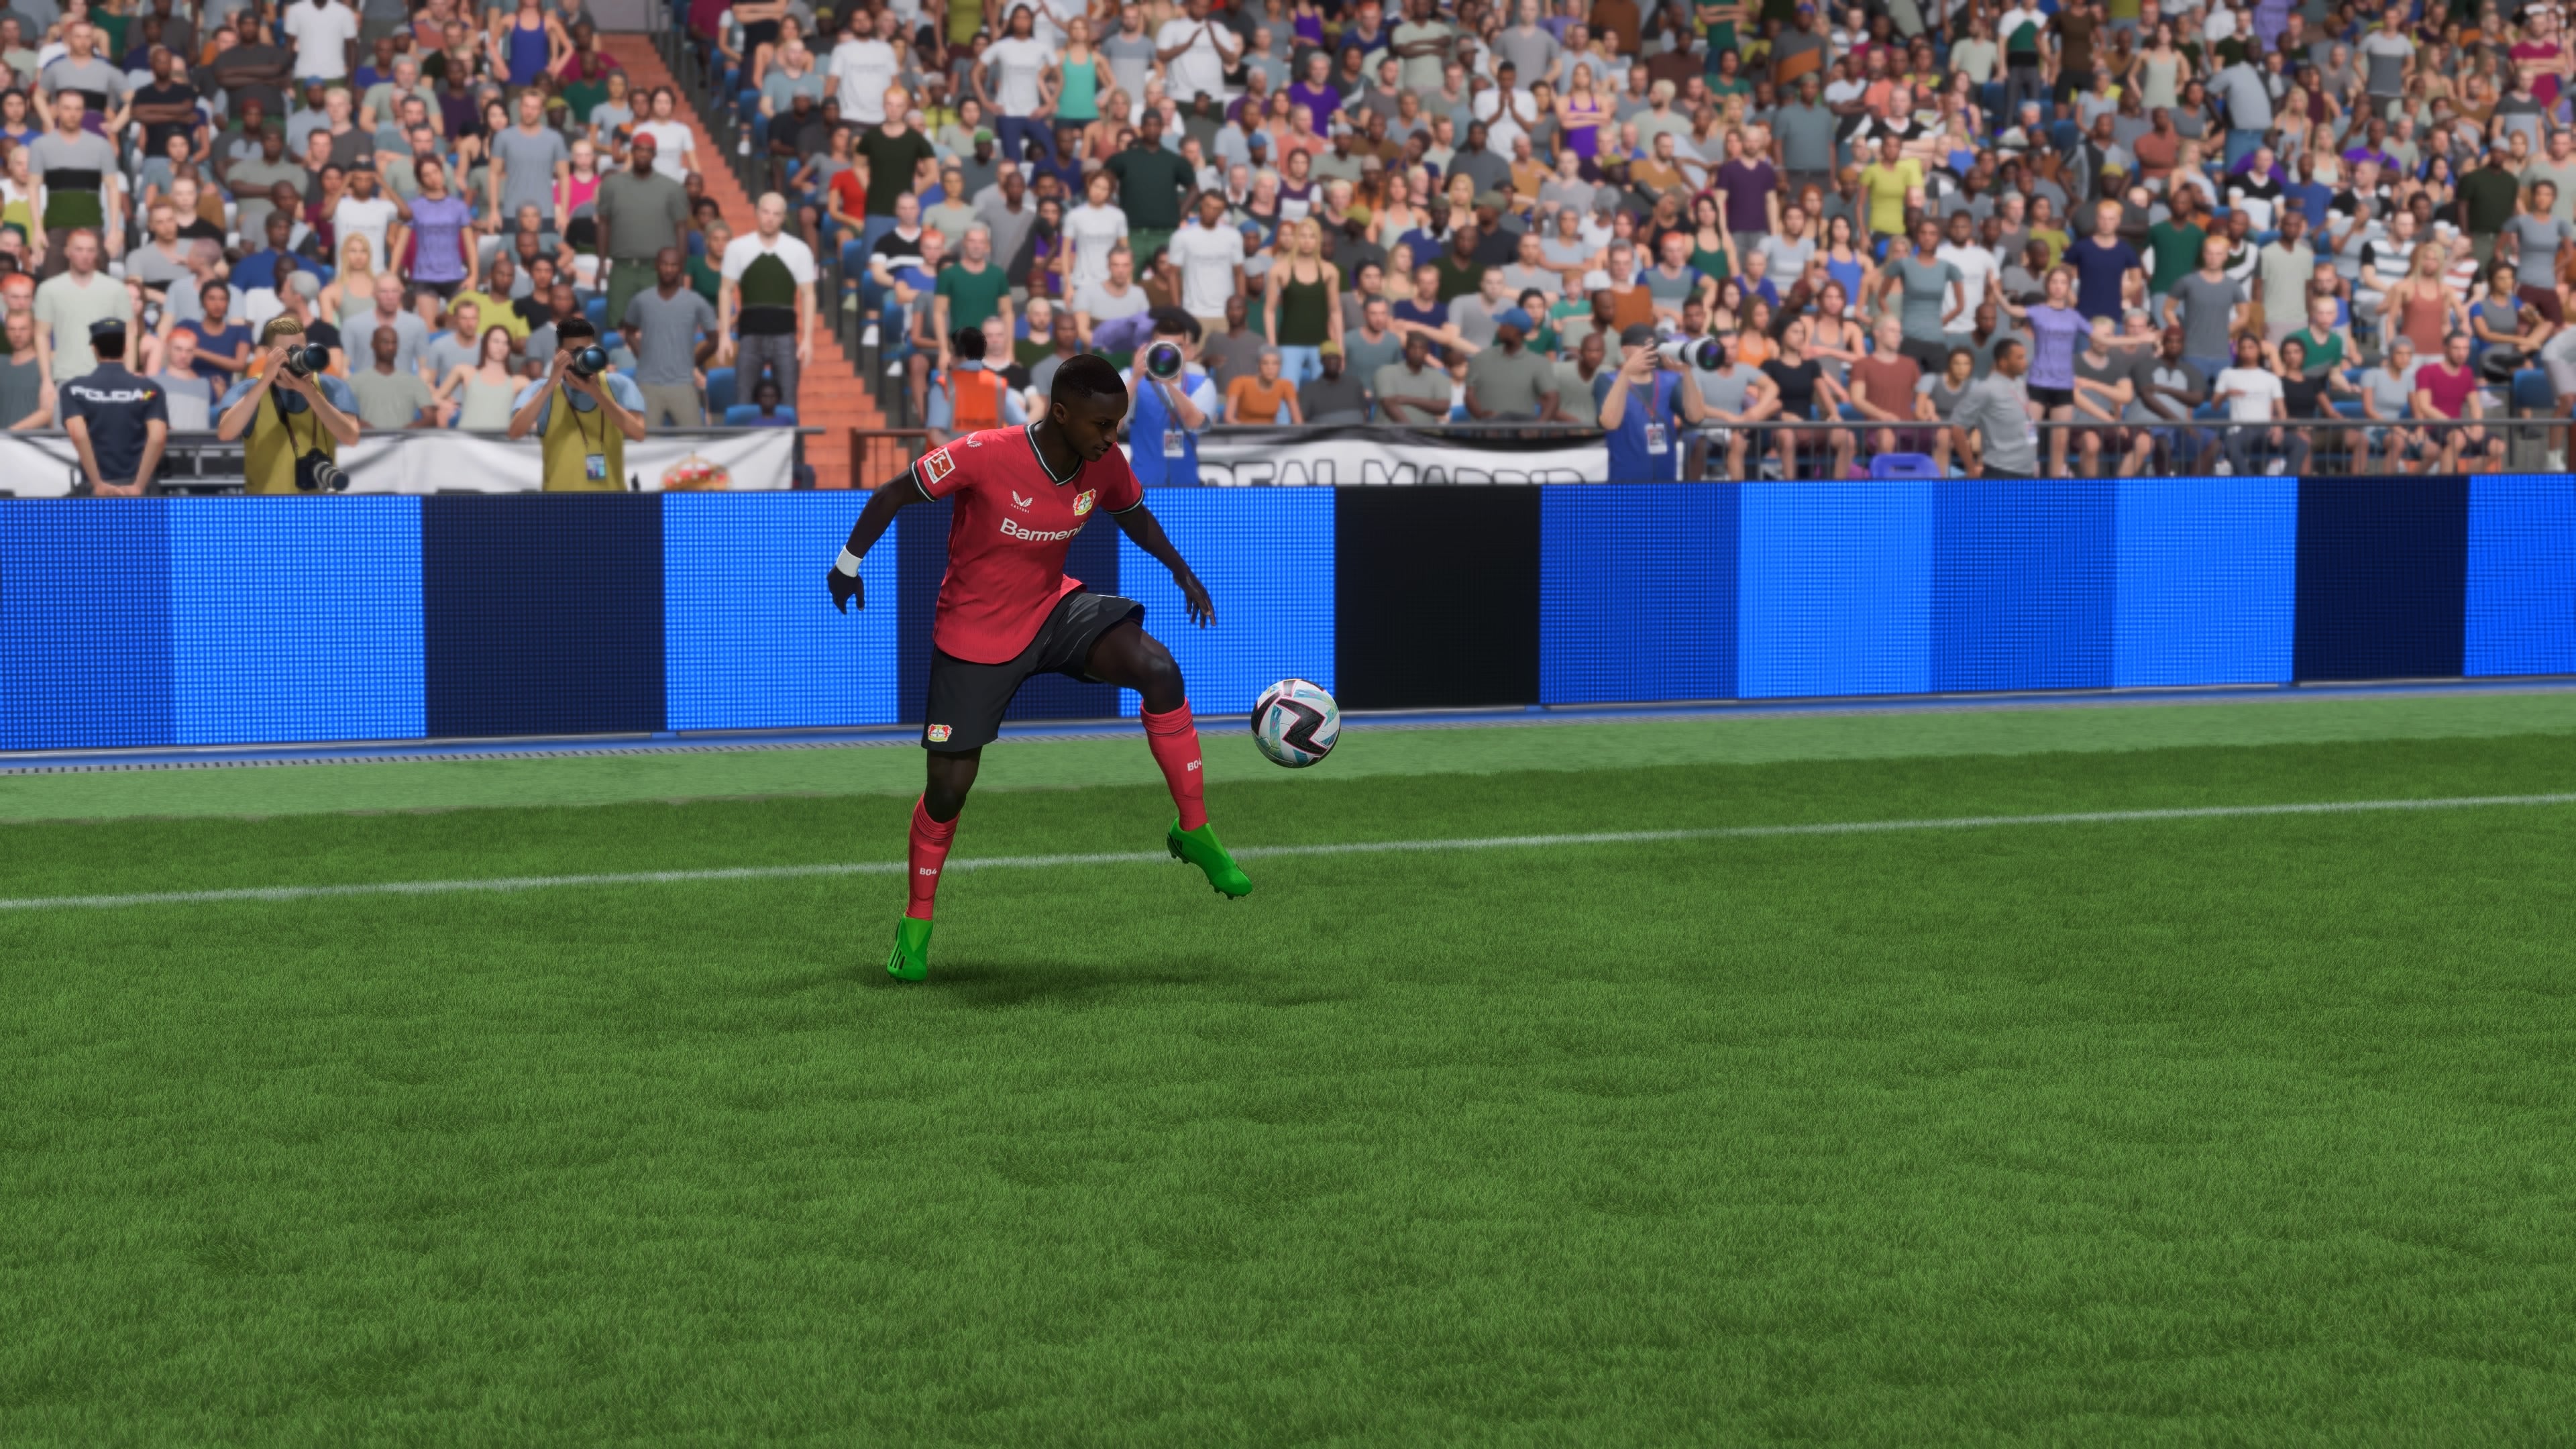 Bayer Leverkusen's Moussa Diaby controls a bouncing ball on the touchline in FIFA 23